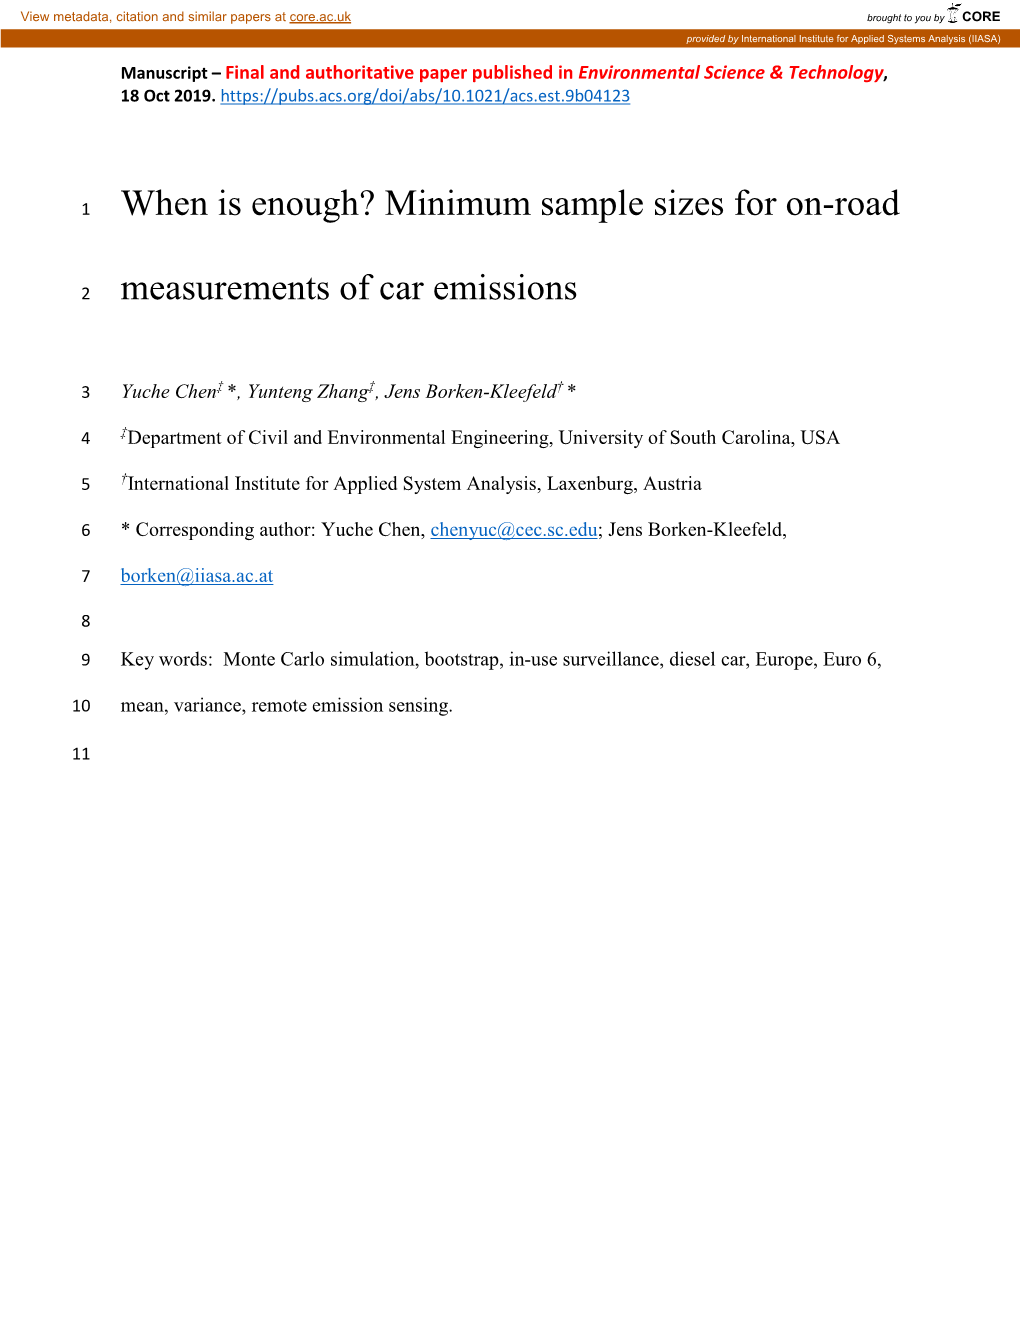 Minimum Sample Sizes for On-Road Measurements of Car